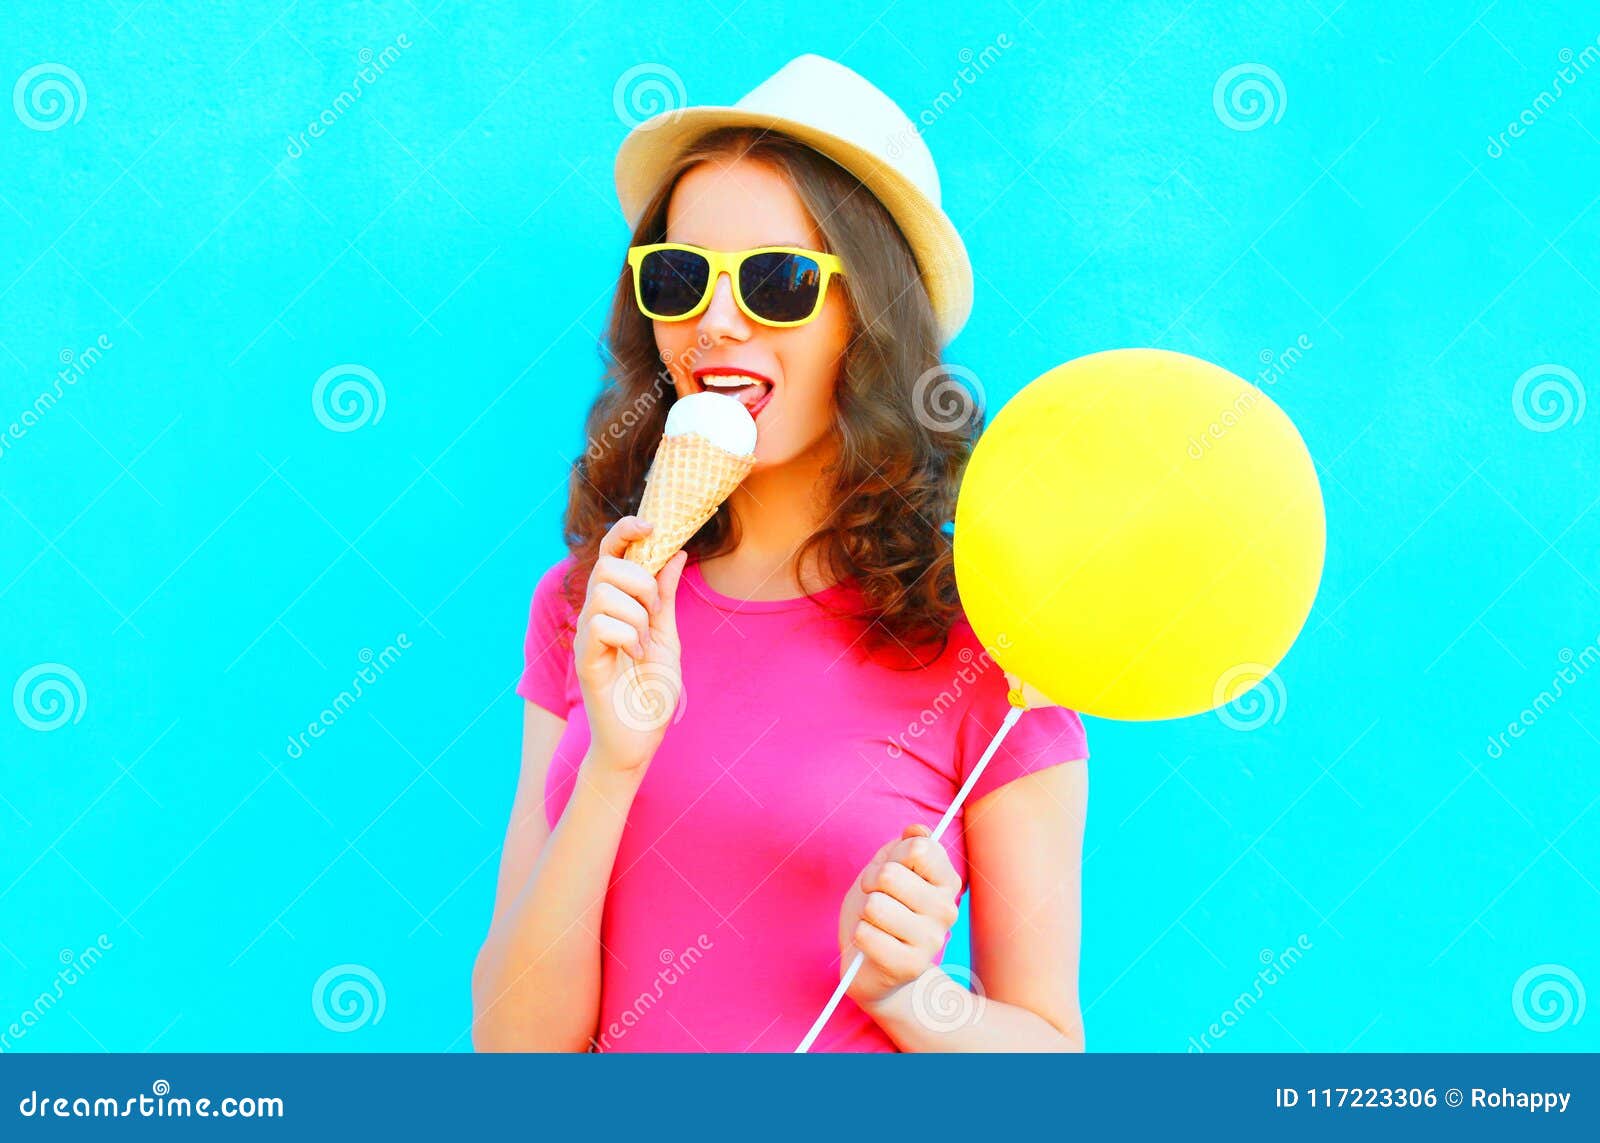 Cool Girl is Trying Ice Cream Wearing a Straw Hat and Pink T-shirt ...